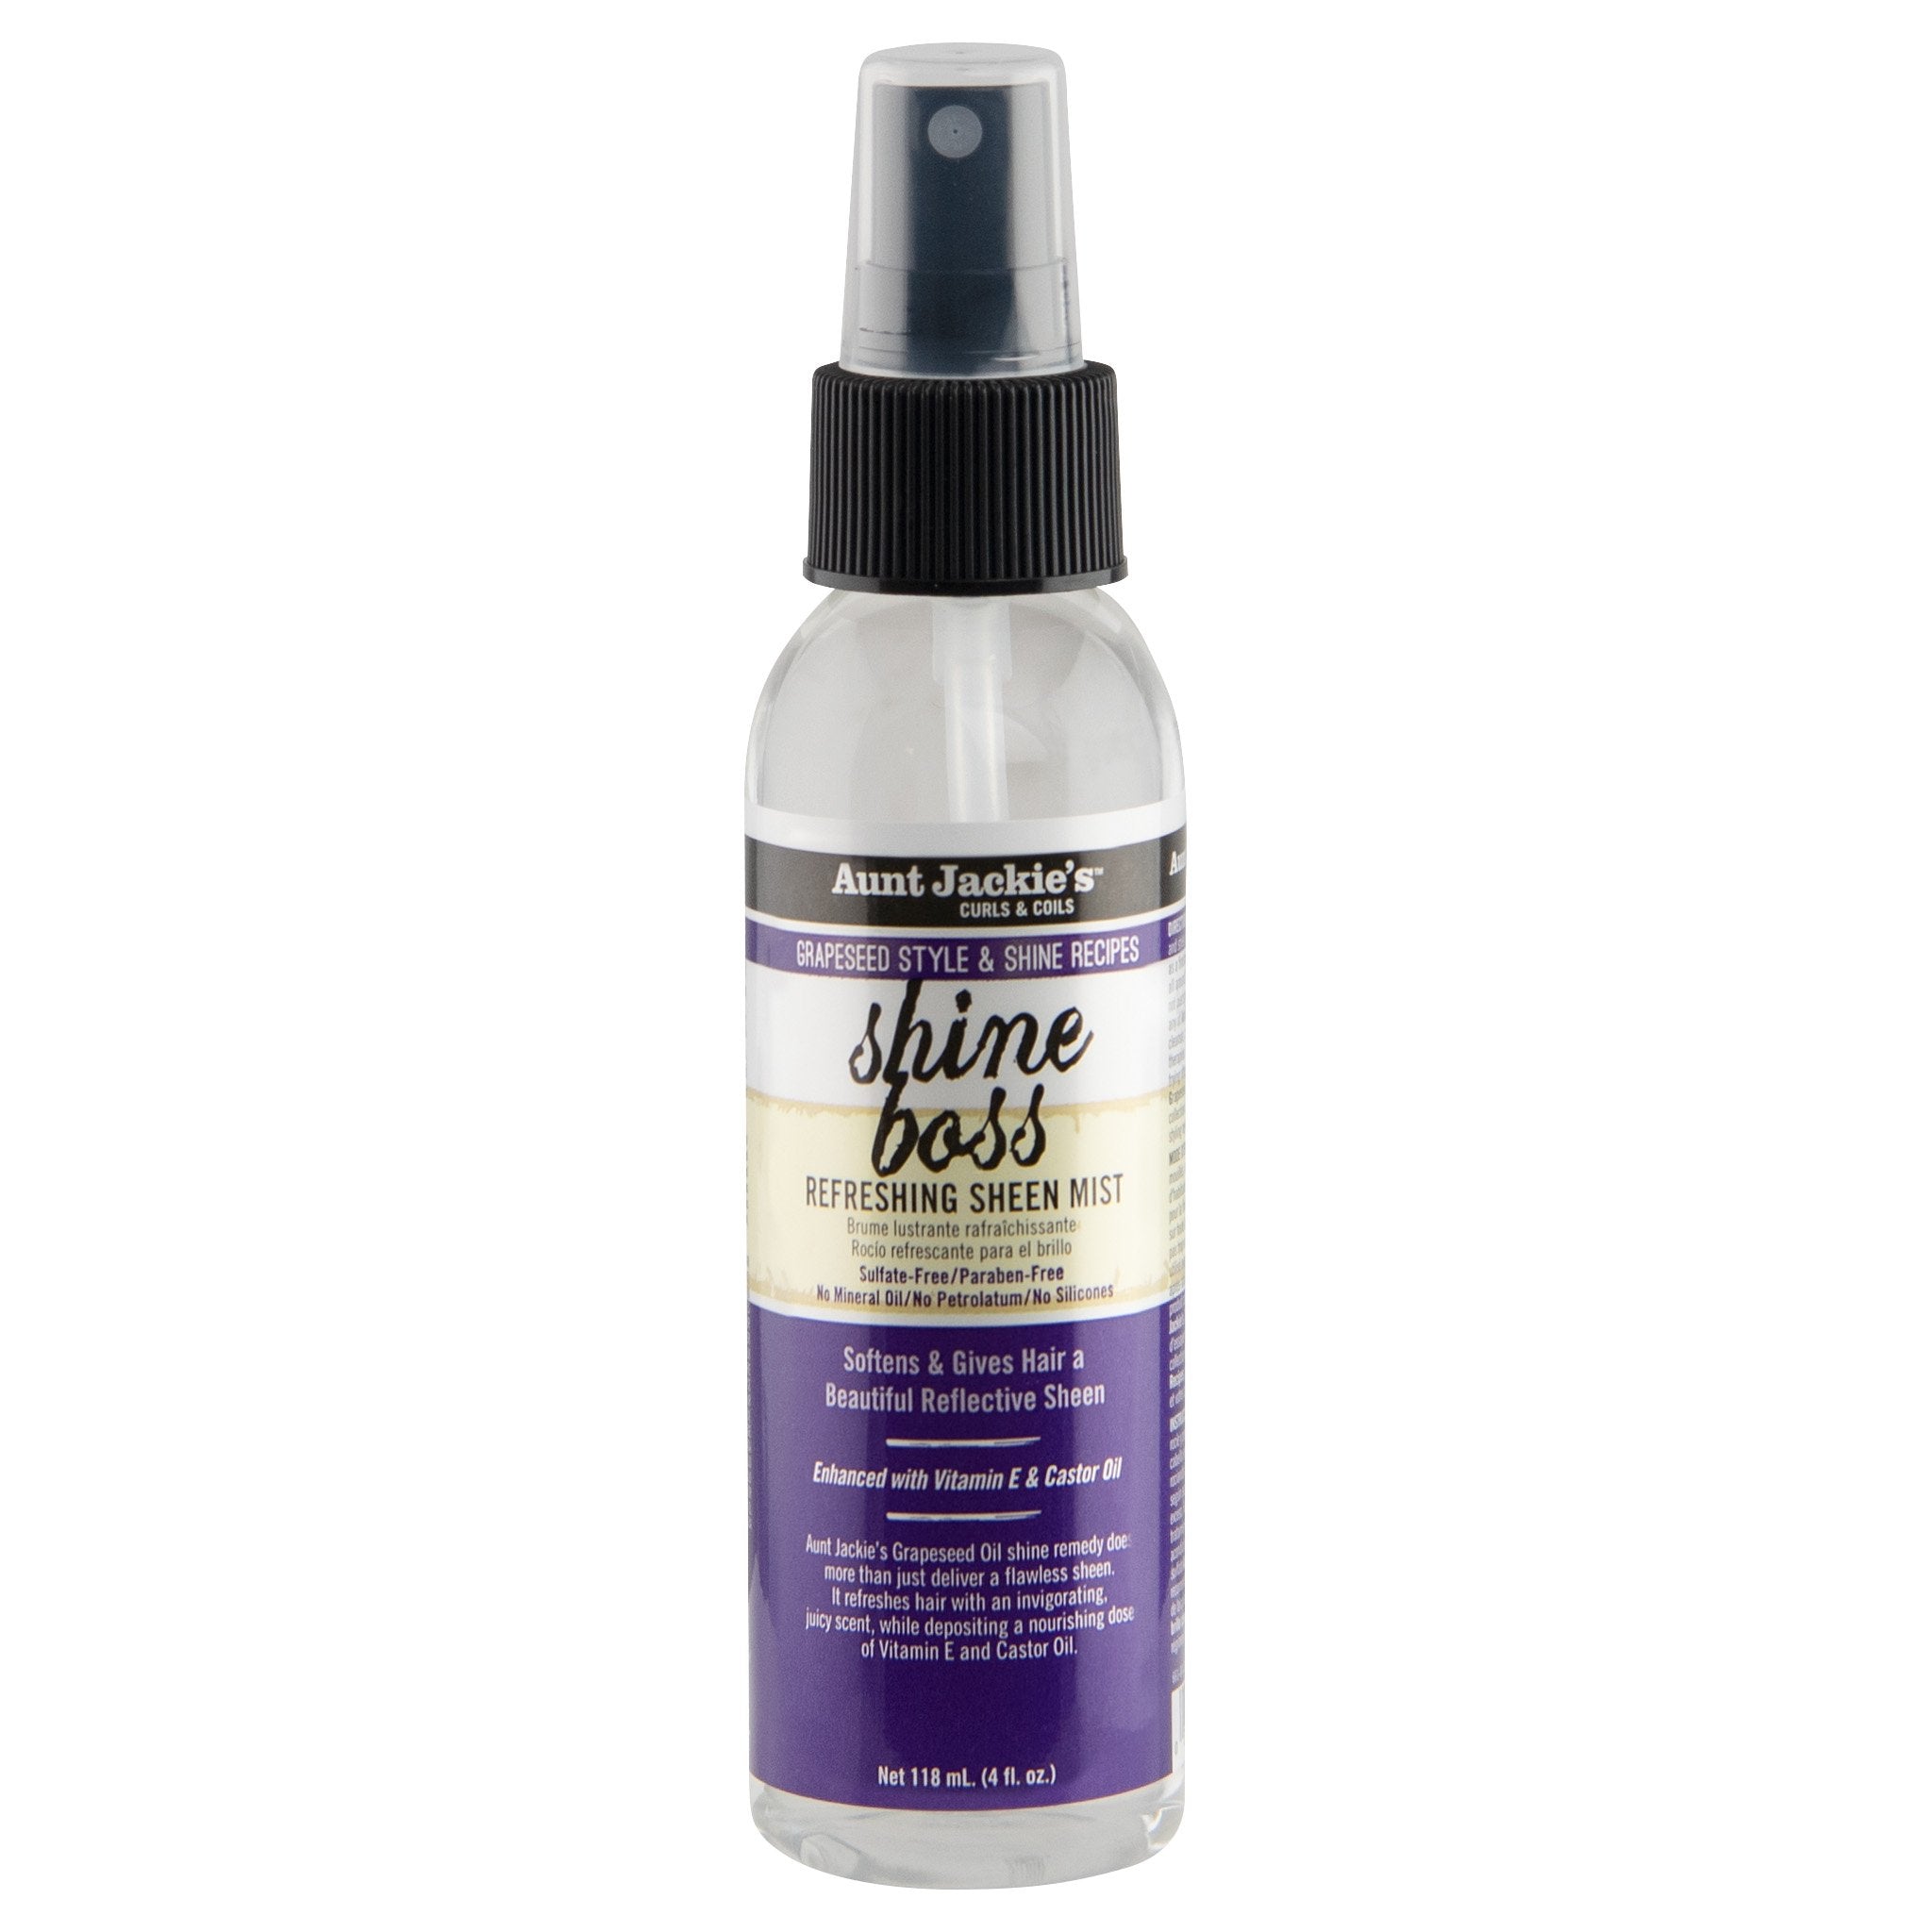 Aunt Jackie's Grapeseed Style & Shine Recipes Shine Boss - 120ml